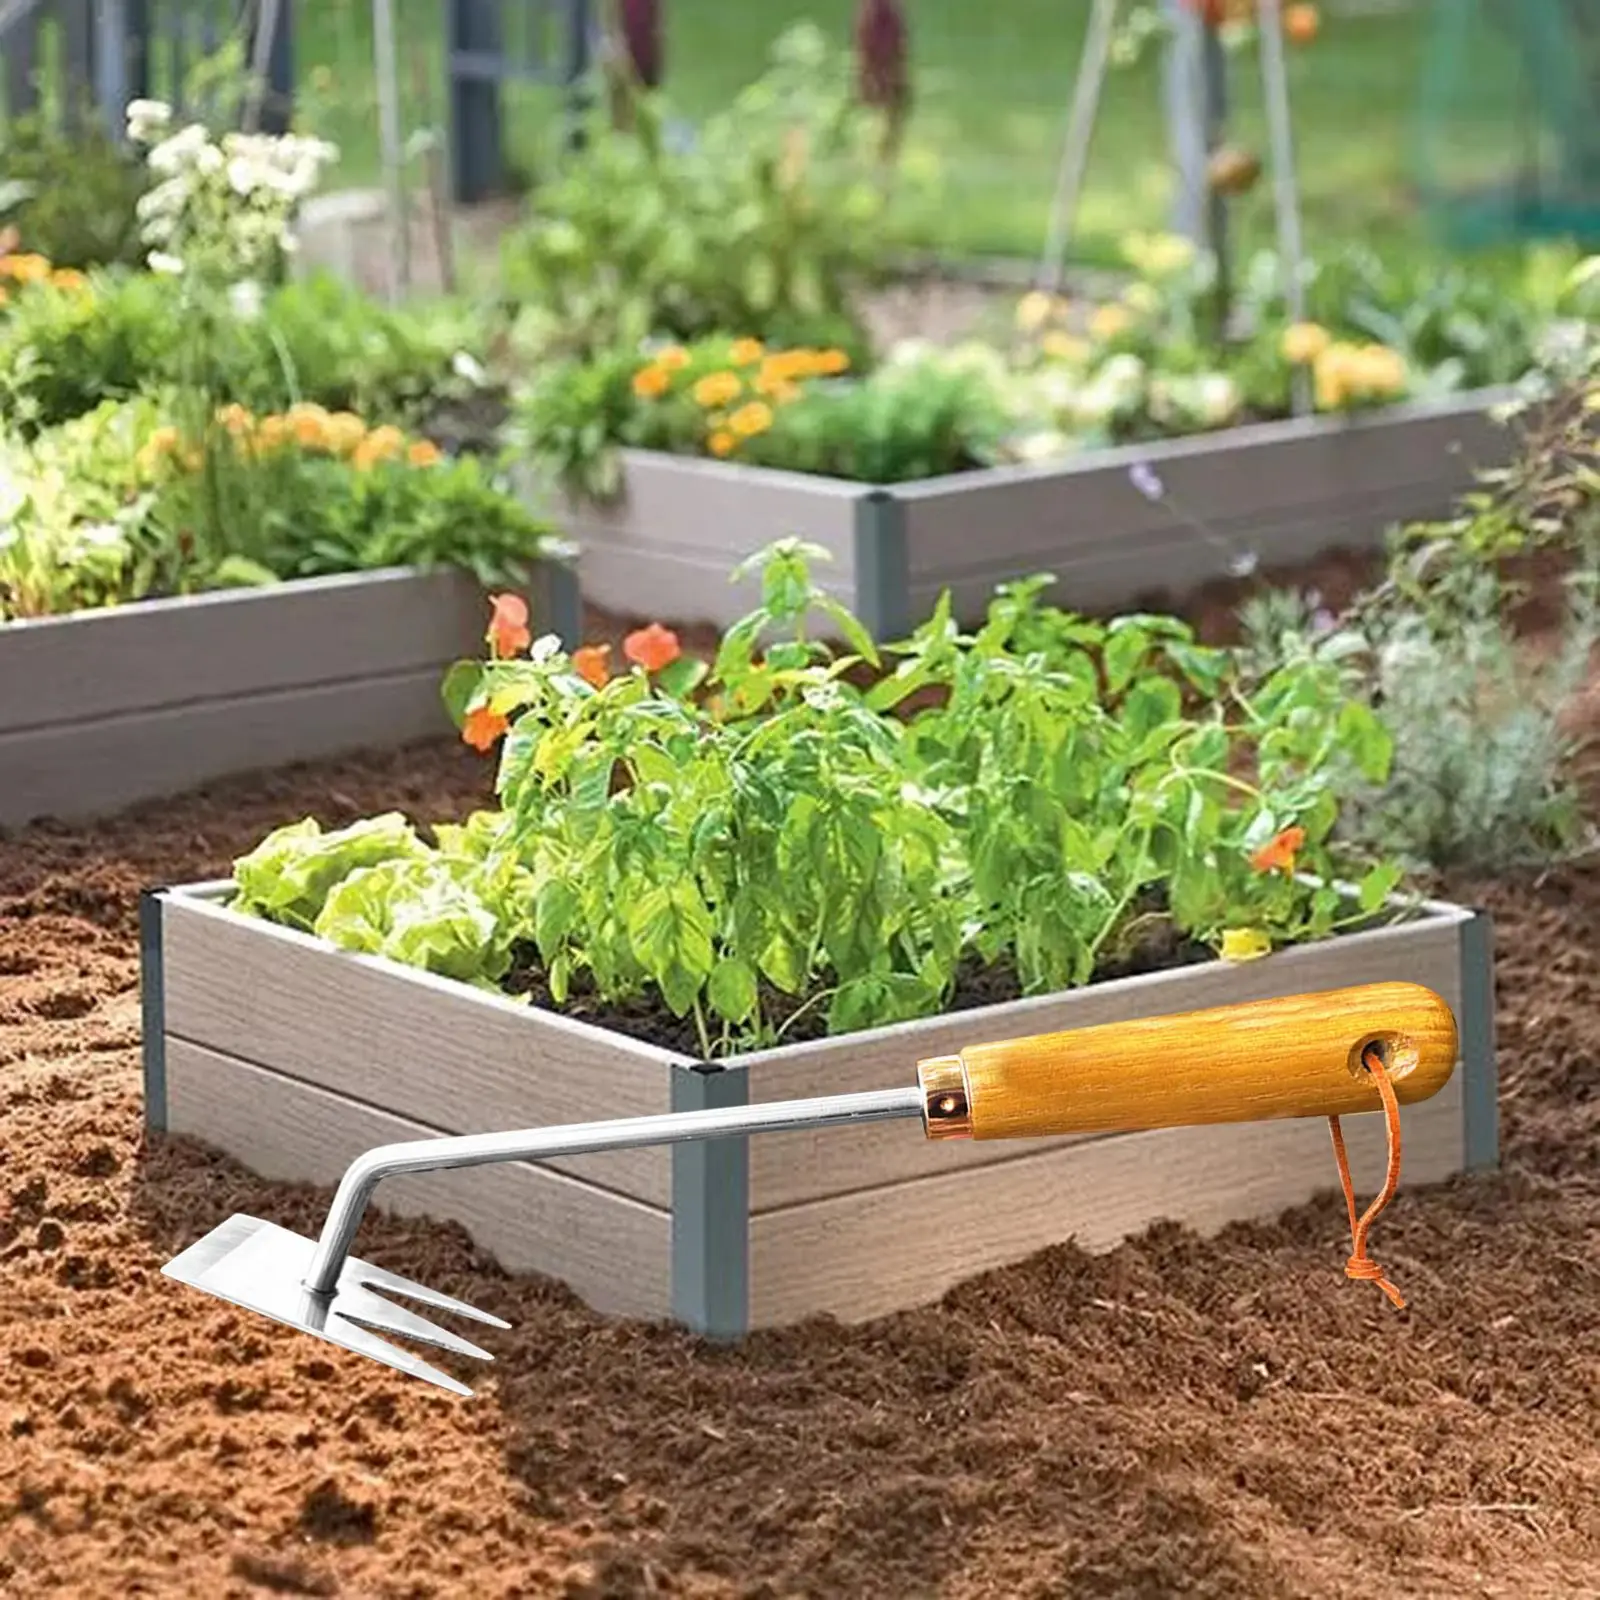 Weeding Tool Agricultural Cultivator Stand up Weeder for Garden Home Weeding